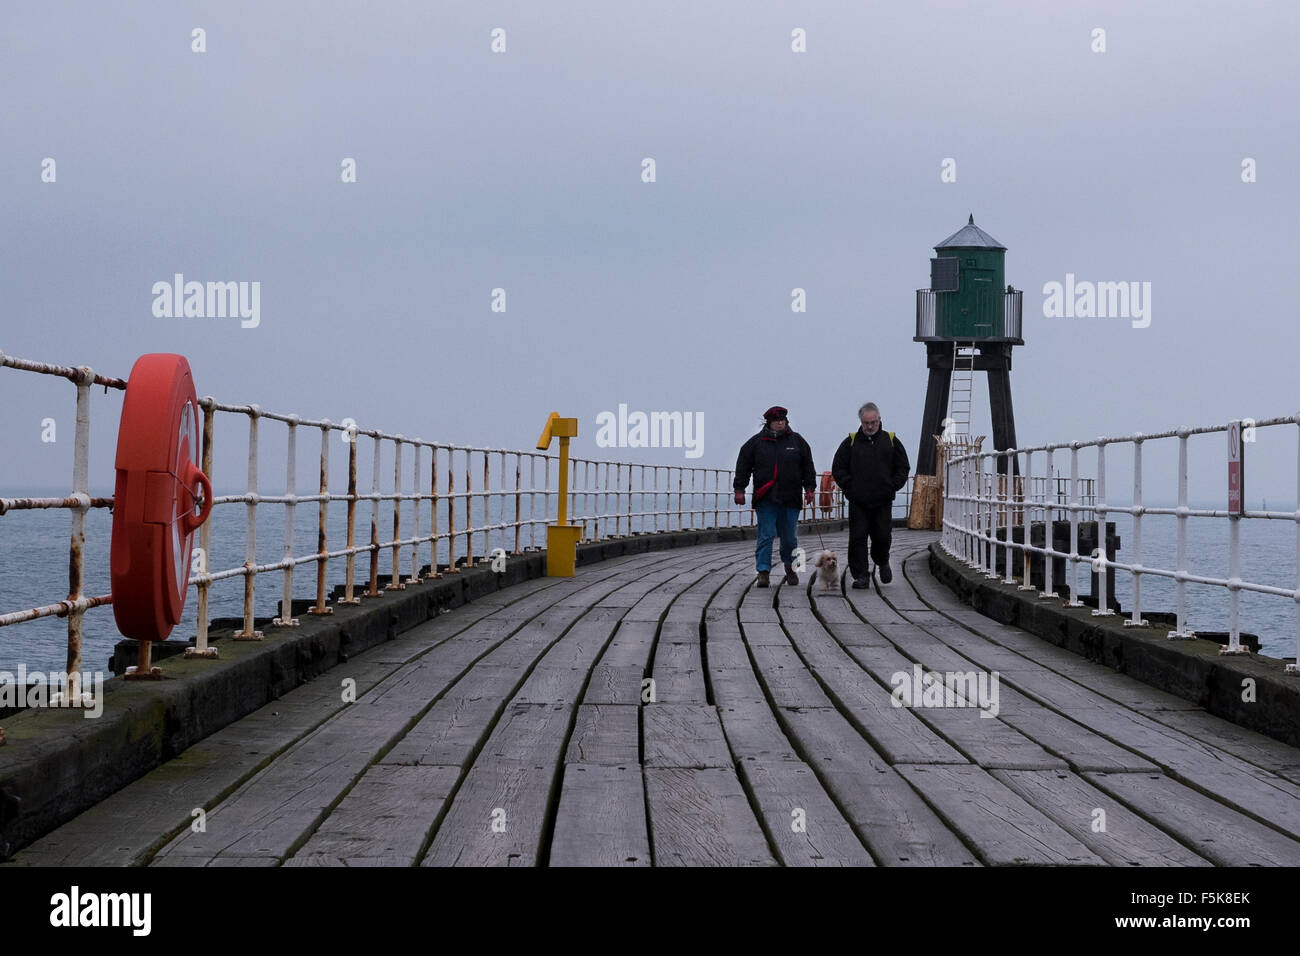 Couple walking pet dog on Whitby's West Pier, England, UK - grey tones of wooden decking boards, sea & sky in cold windy dull autumn weather at coast. Stock Photo